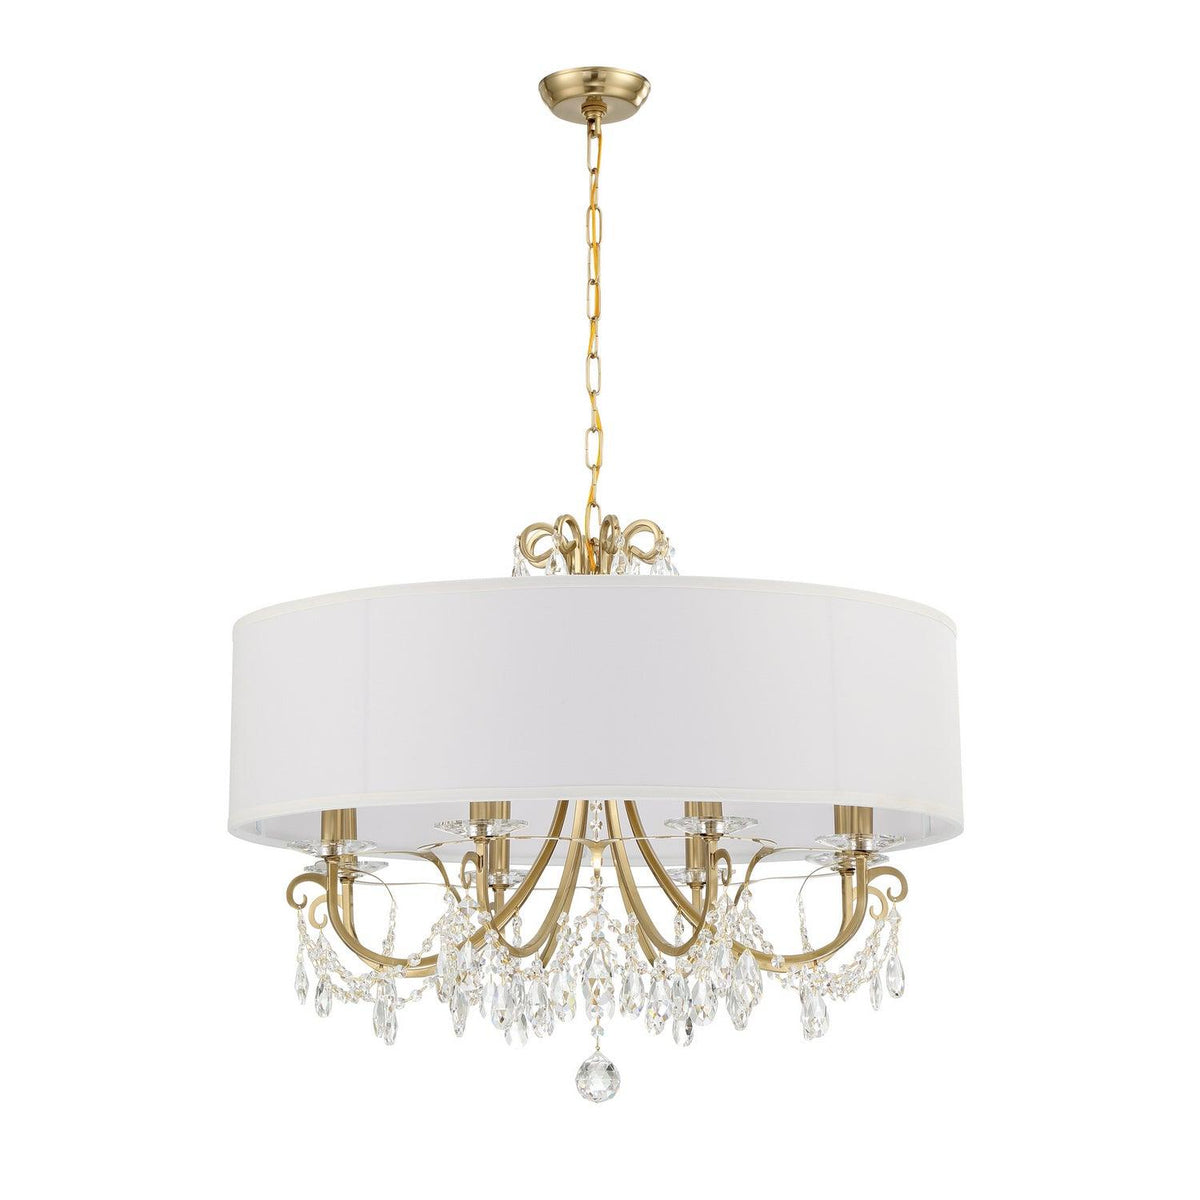 Crystorama - Othello Drum Shade Chandelier - 6628-VG-CL-MWP | Montreal Lighting & Hardware